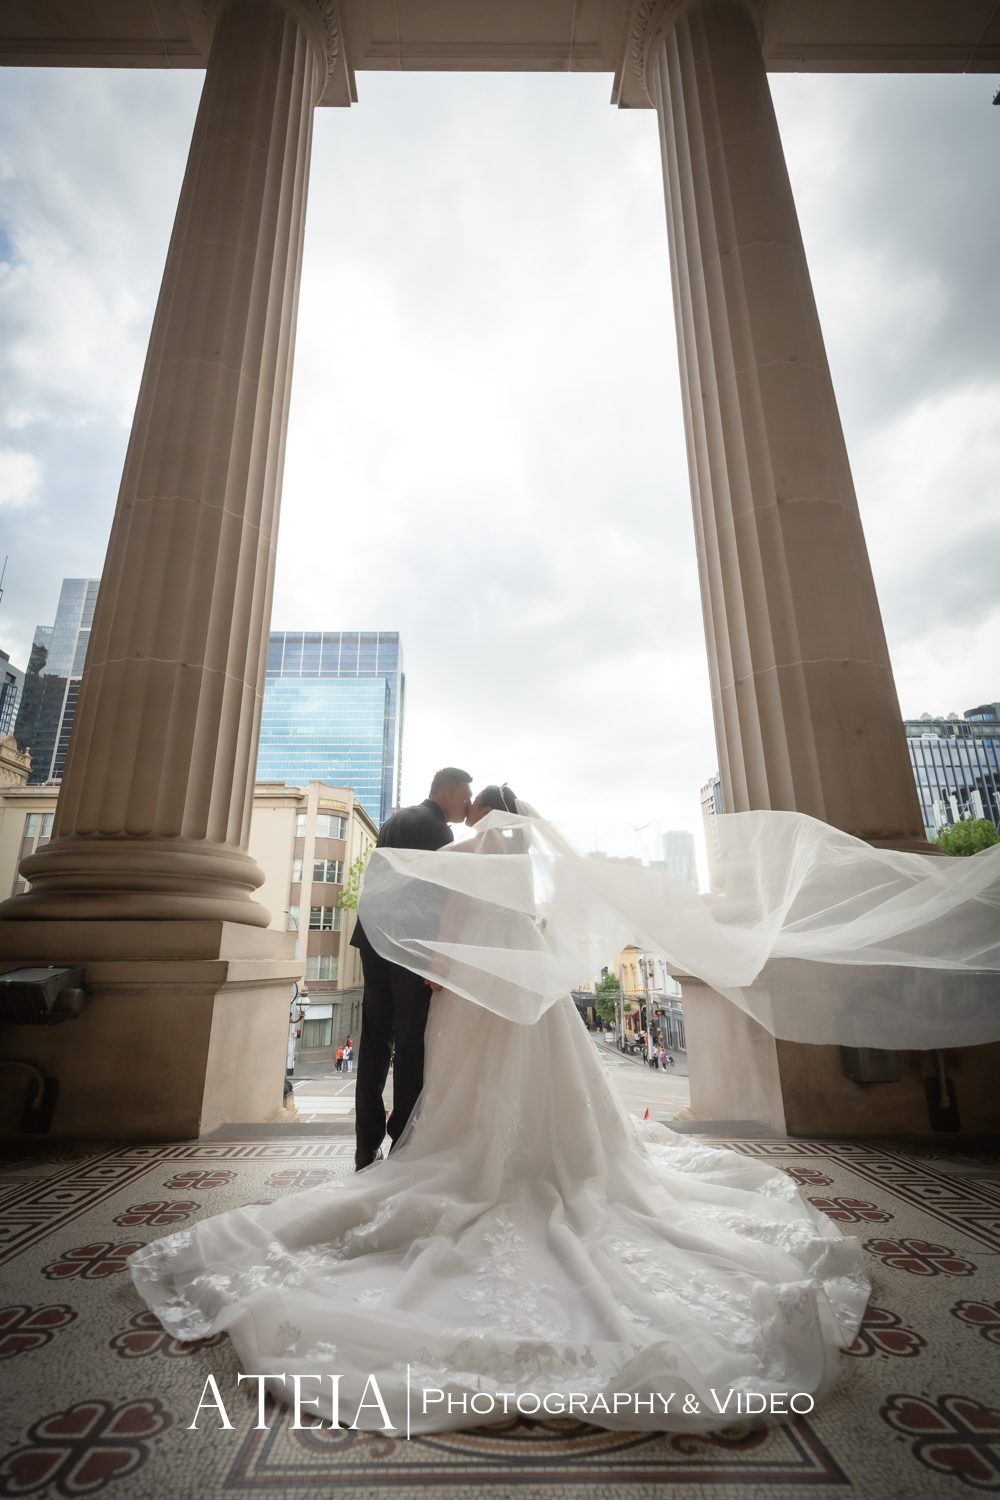 , Rachel and Phillip&#8217;s wedding photography at Happy Reception captured by ATEIA Photography &#038; Video